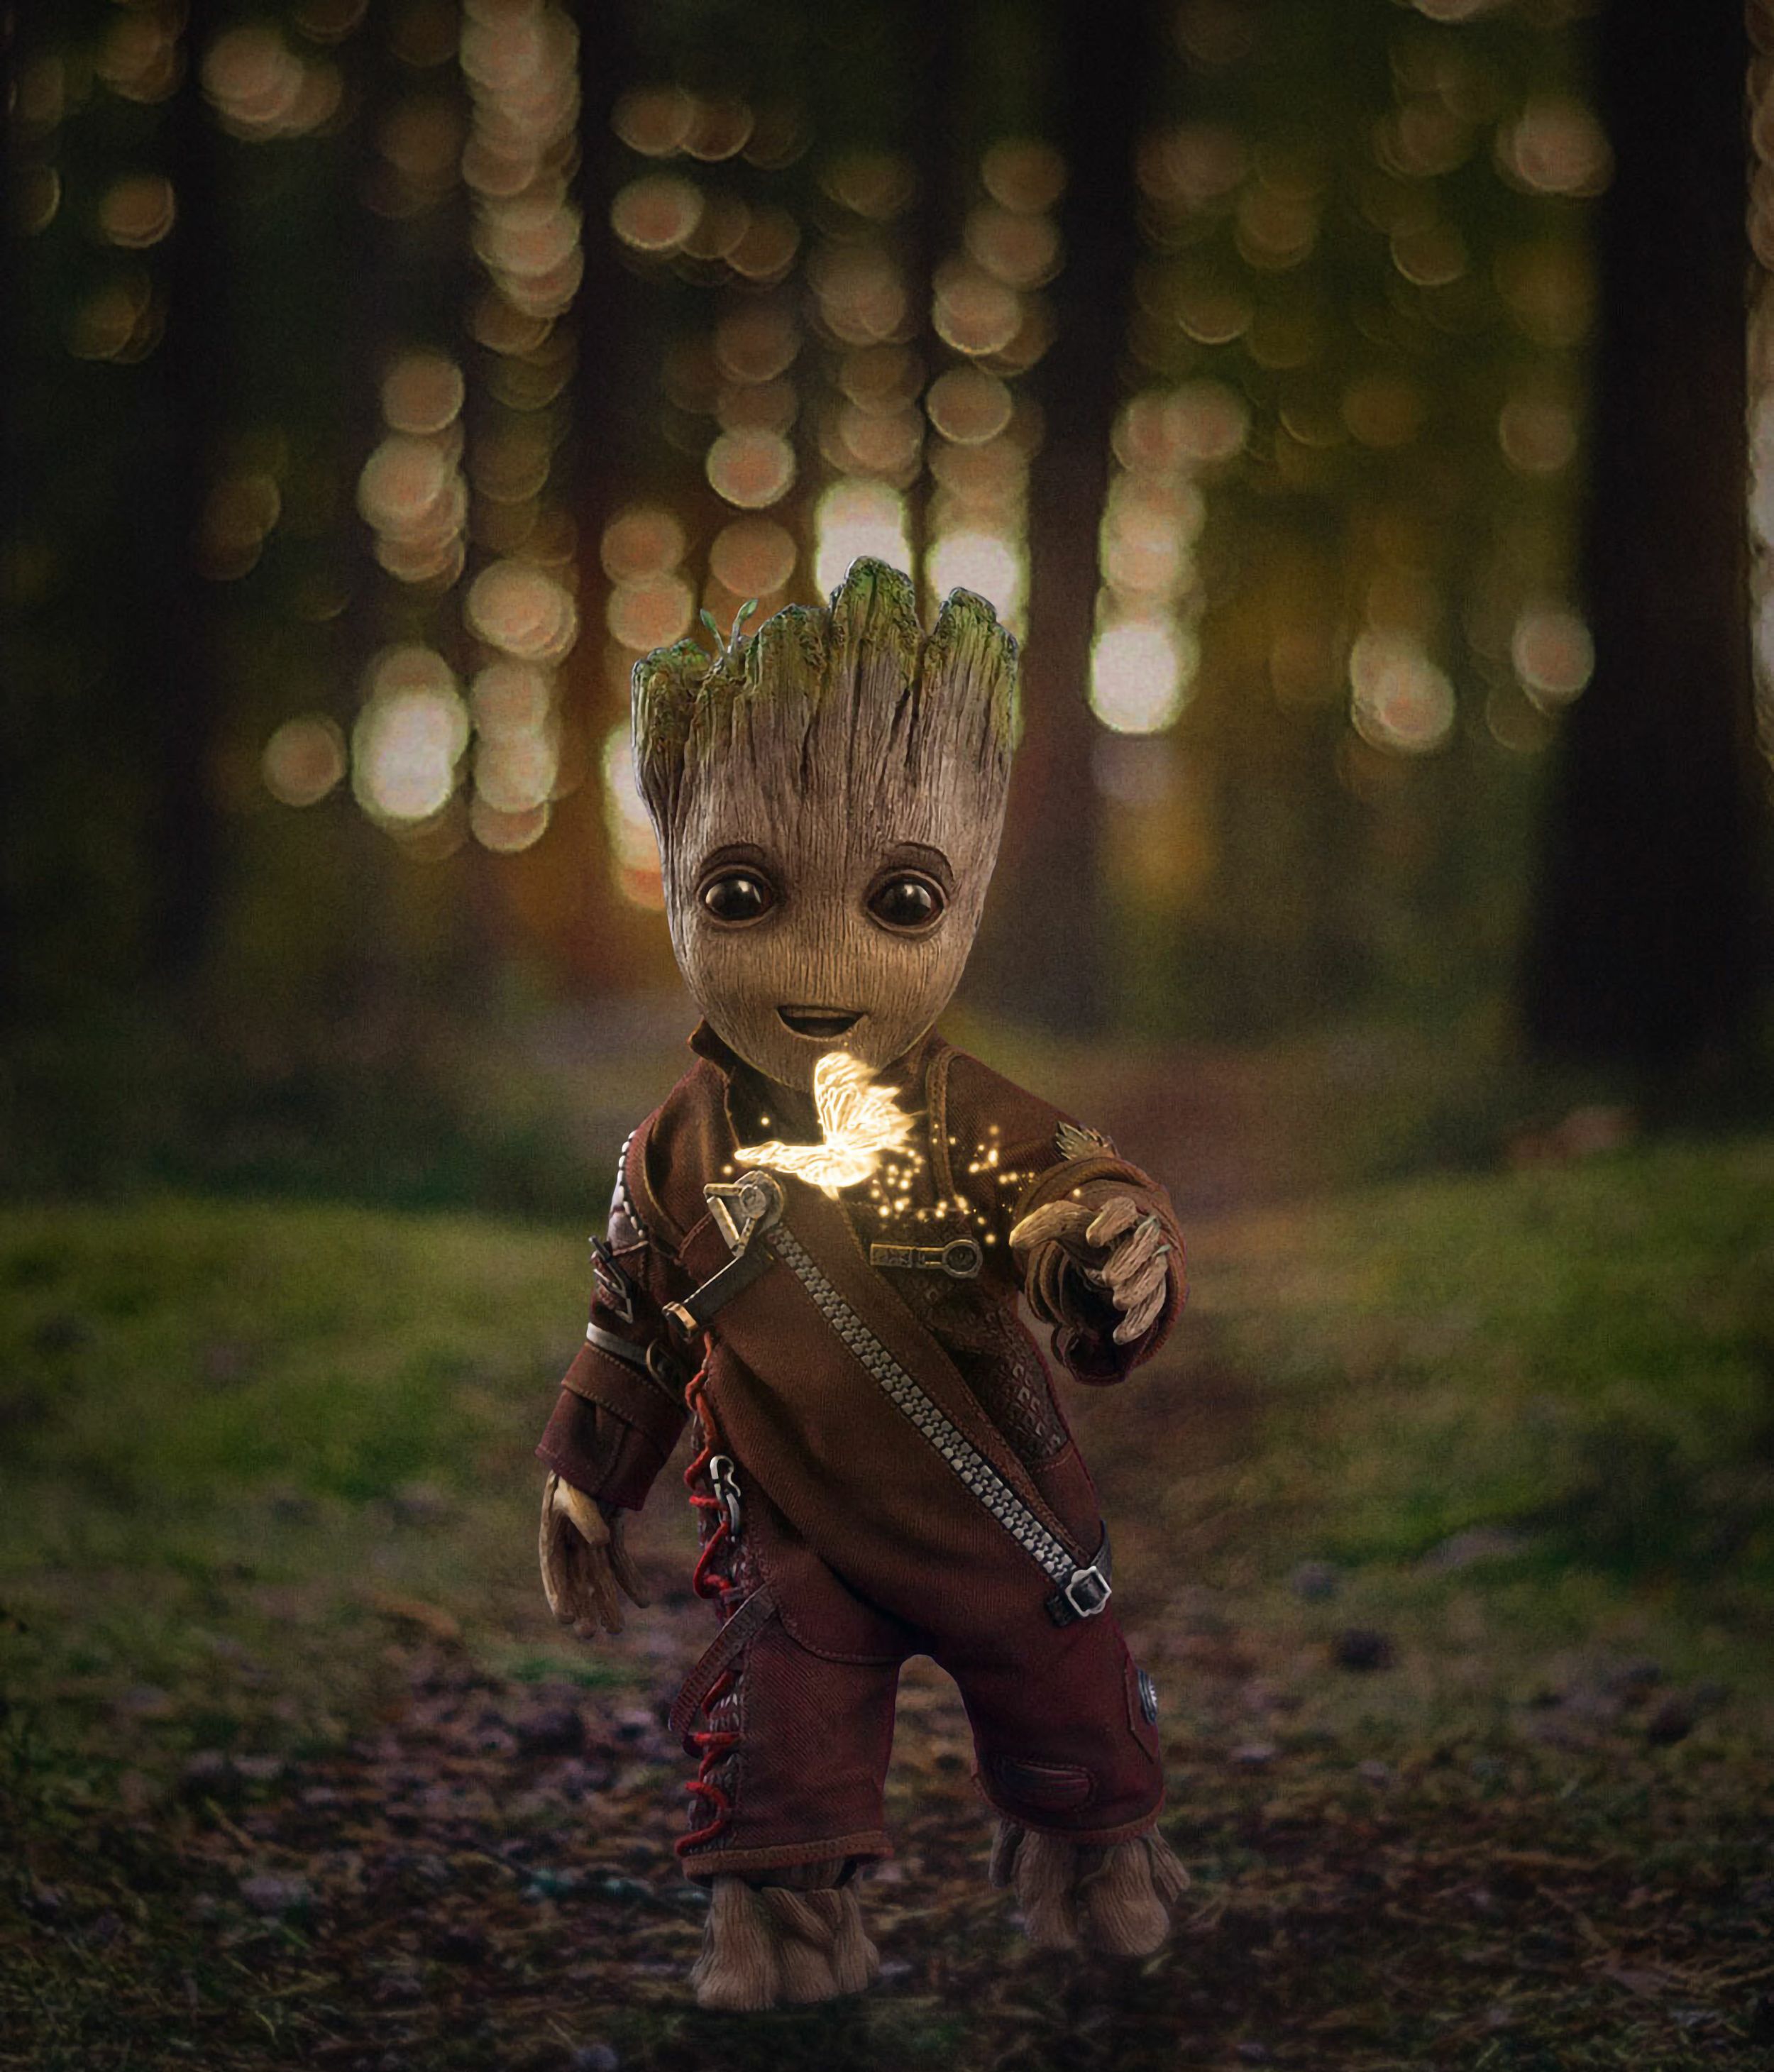 Groot HD 4k Android Wallpapers - Wallpaper Cave - 2500 x 2920 jpeg 587kB